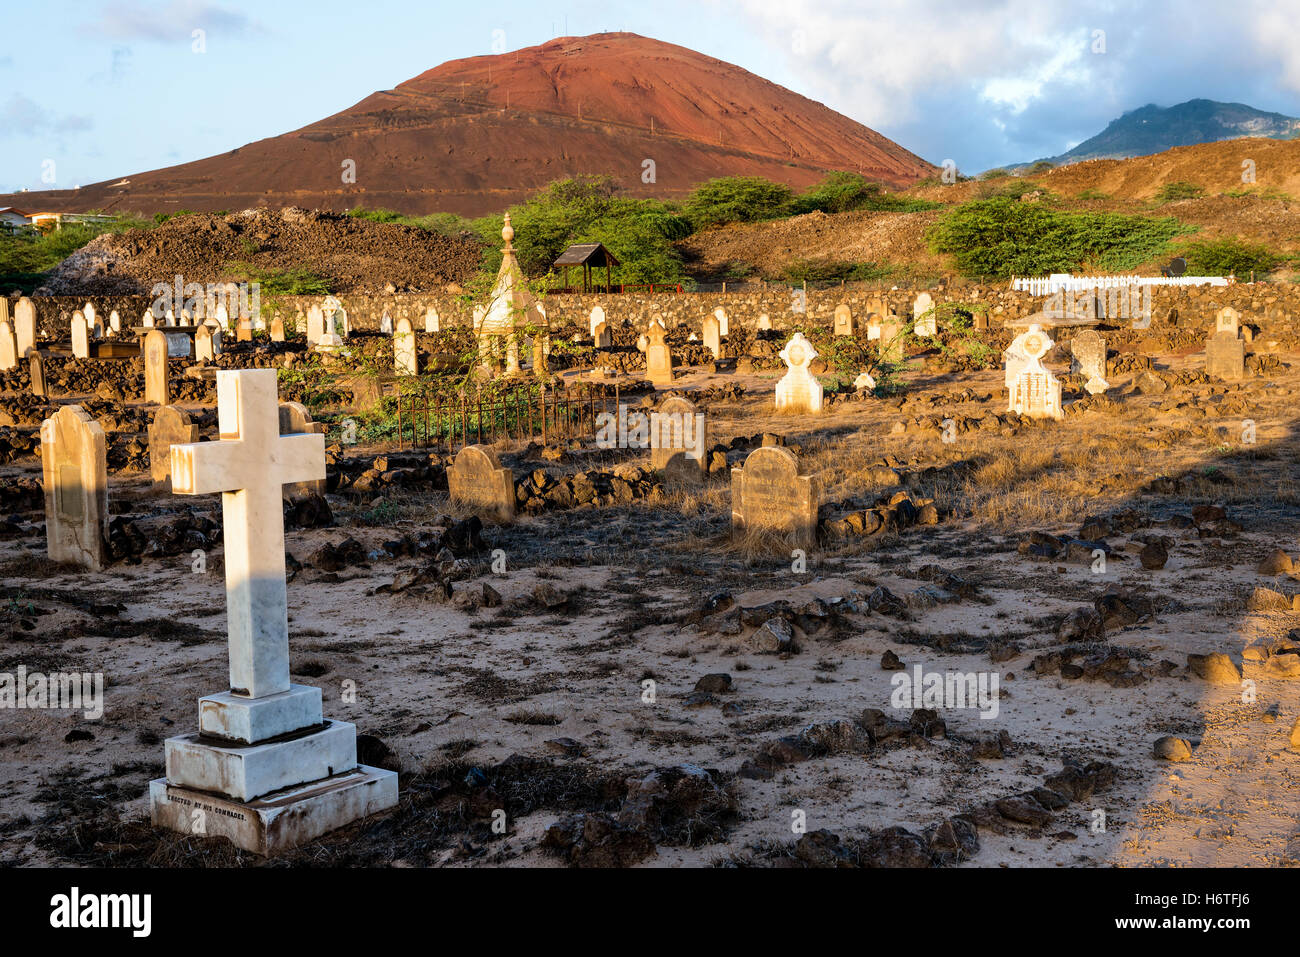 Ascension Island Dead mans beach cemetery where grave stones show British casualties from shipwrecks and disease Stock Photo